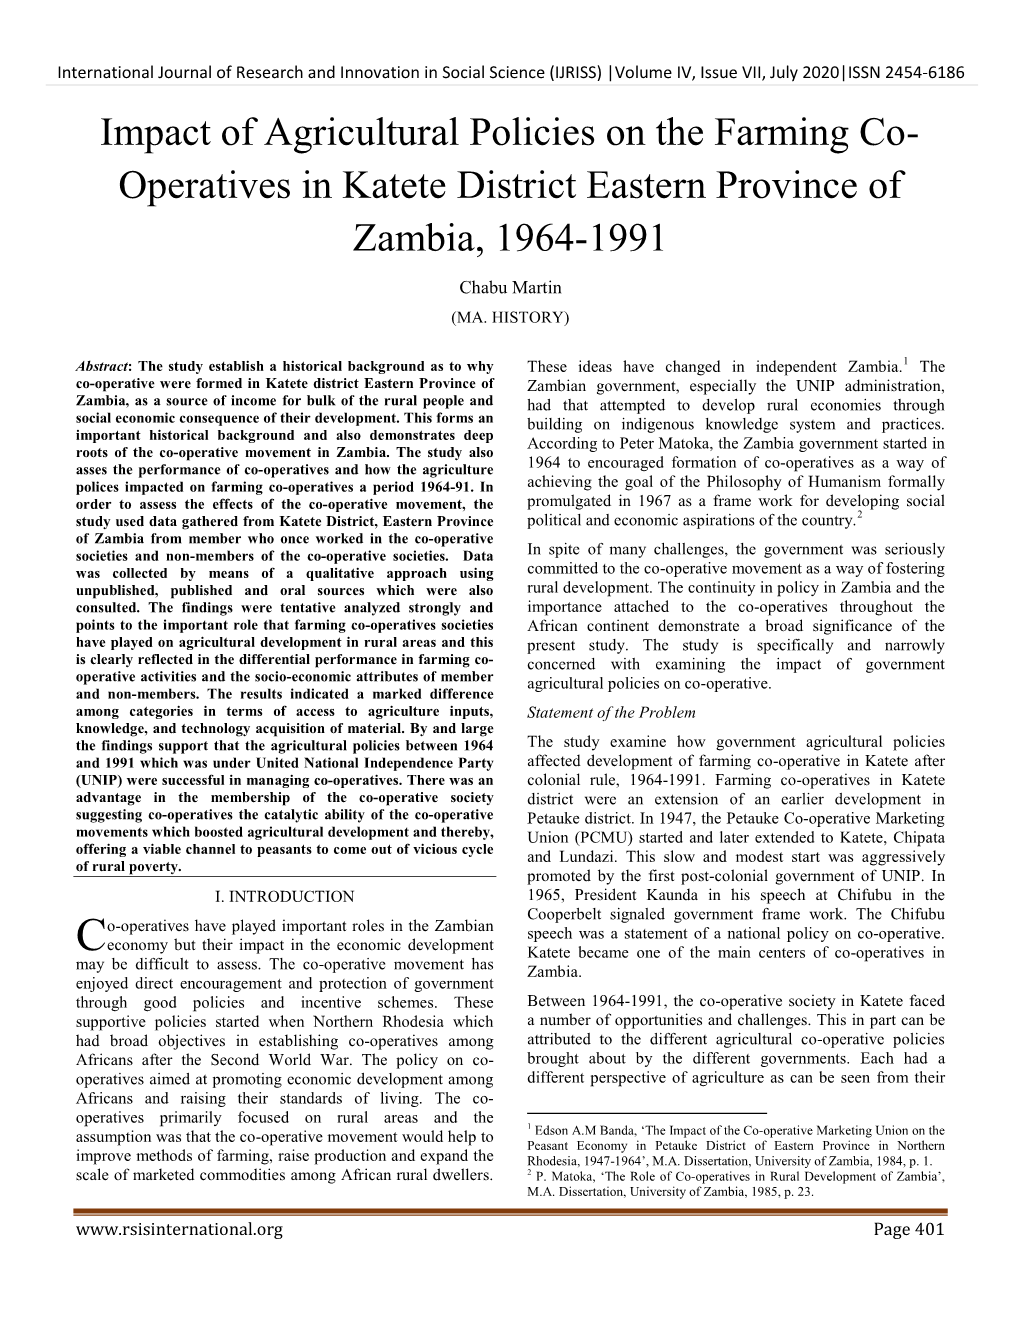 Impact of Agricultural Policies on the Farming Co- Operatives in Katete District Eastern Province of Zambia, 1964-1991